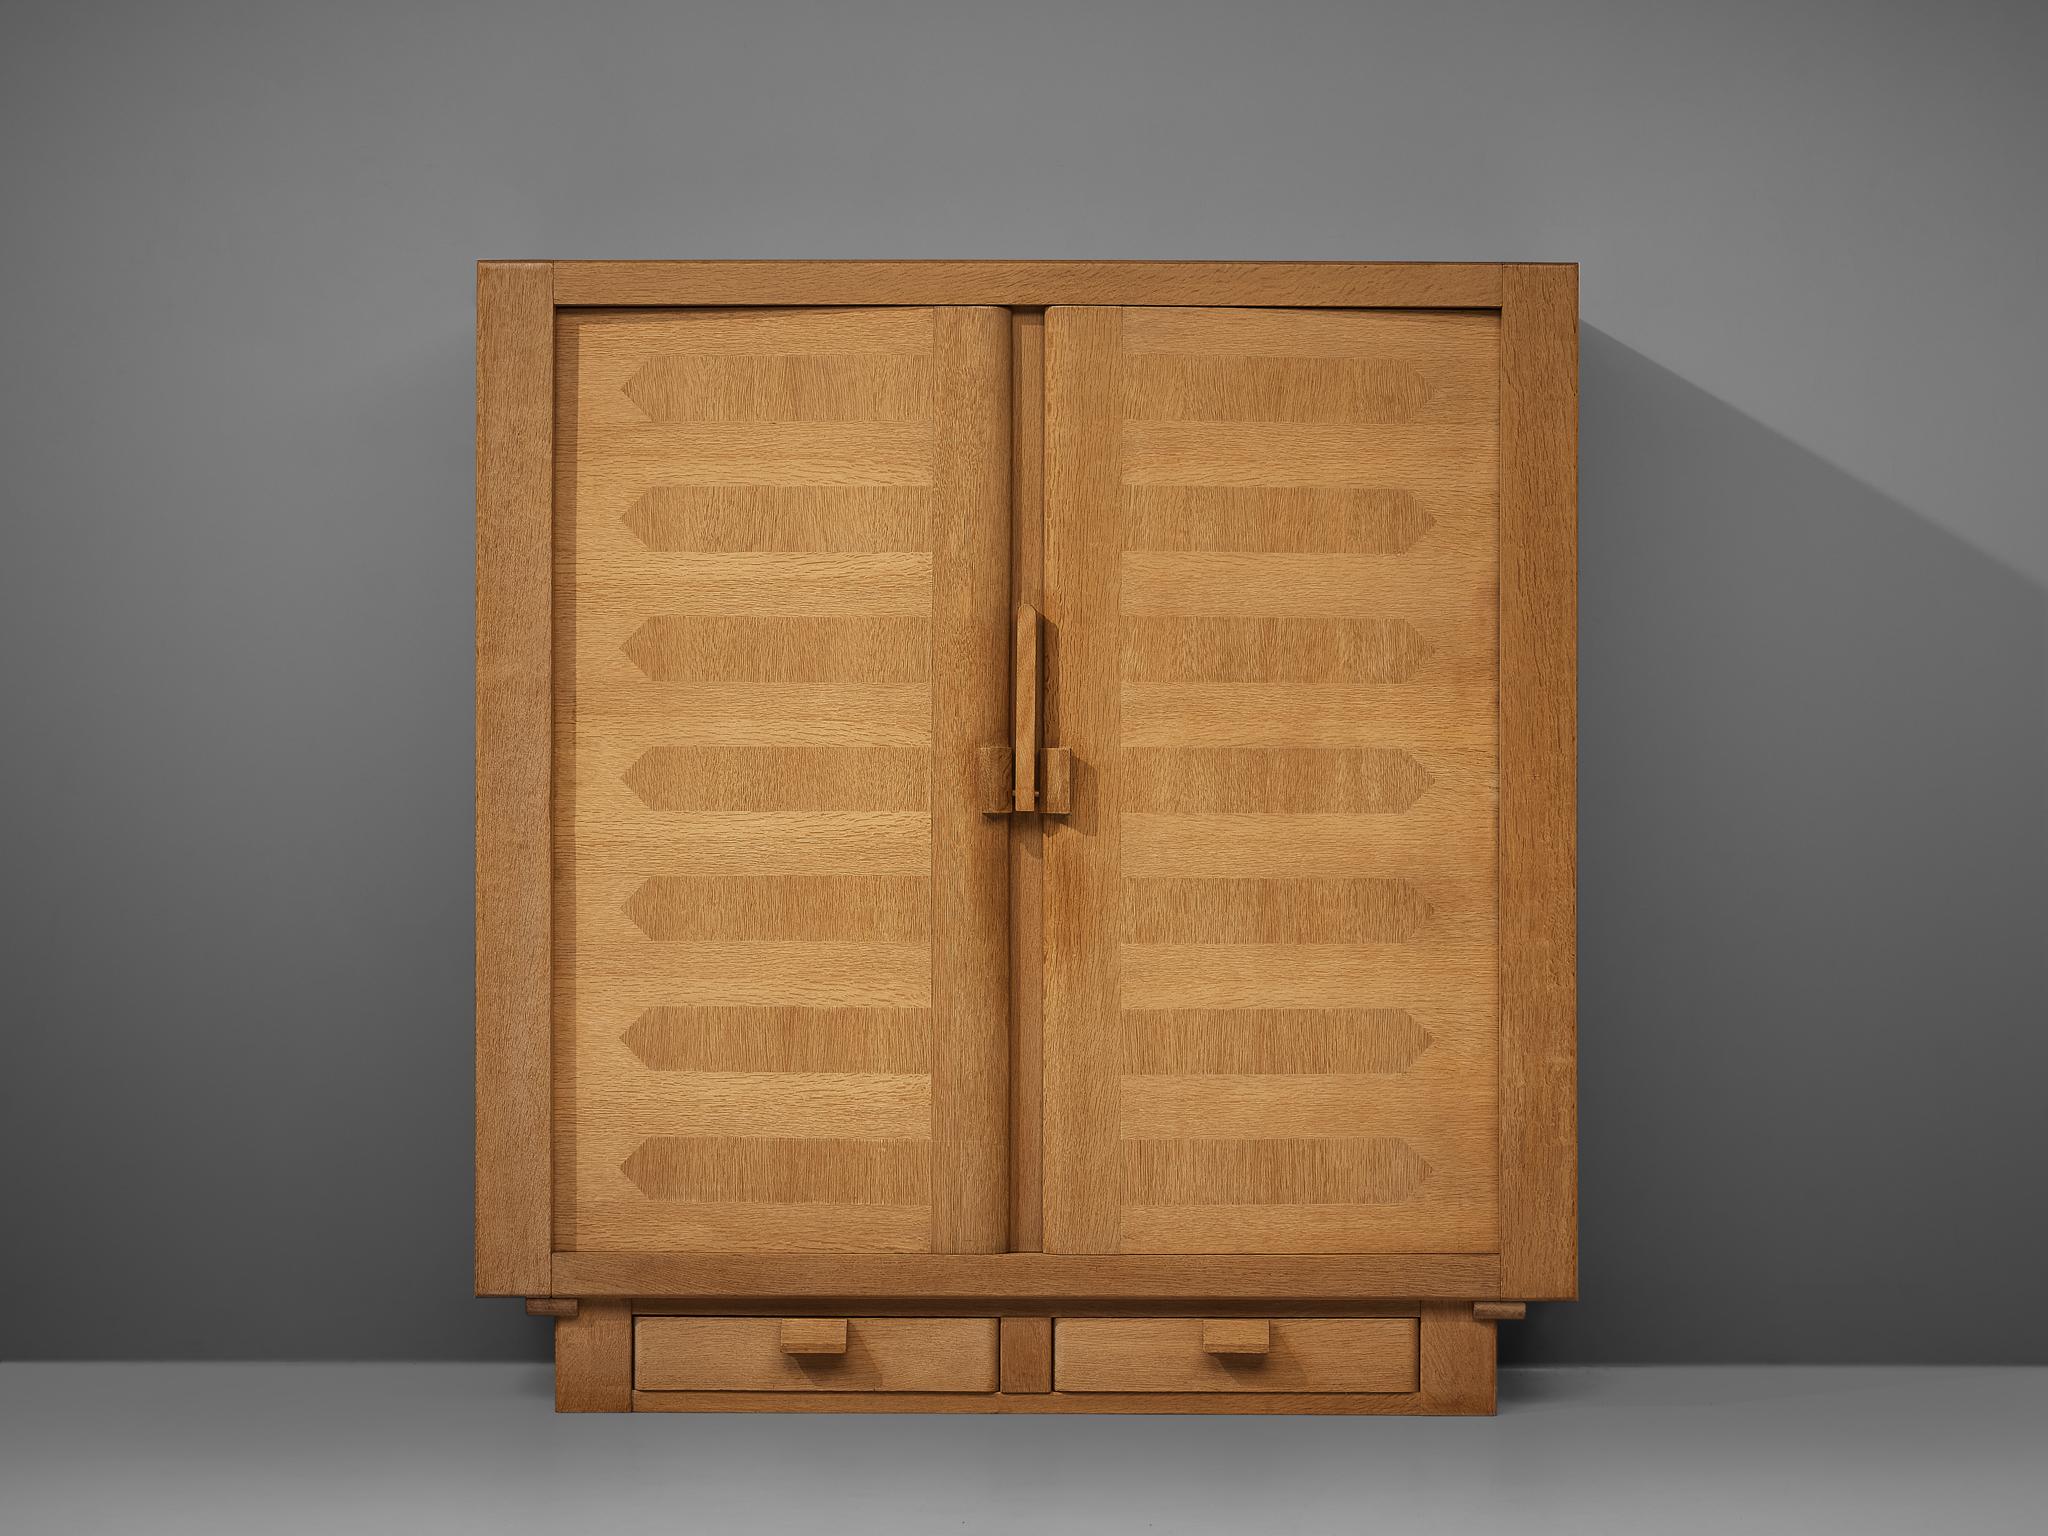 Guillerme et Chambron, amoire, solid oak, France, 1960s

French designer duo Guillerme et Chambron once again proof their great craftsmanship. This cubic wardrobe with two doors and two drawers at the bottom shows geometric inlays that structure